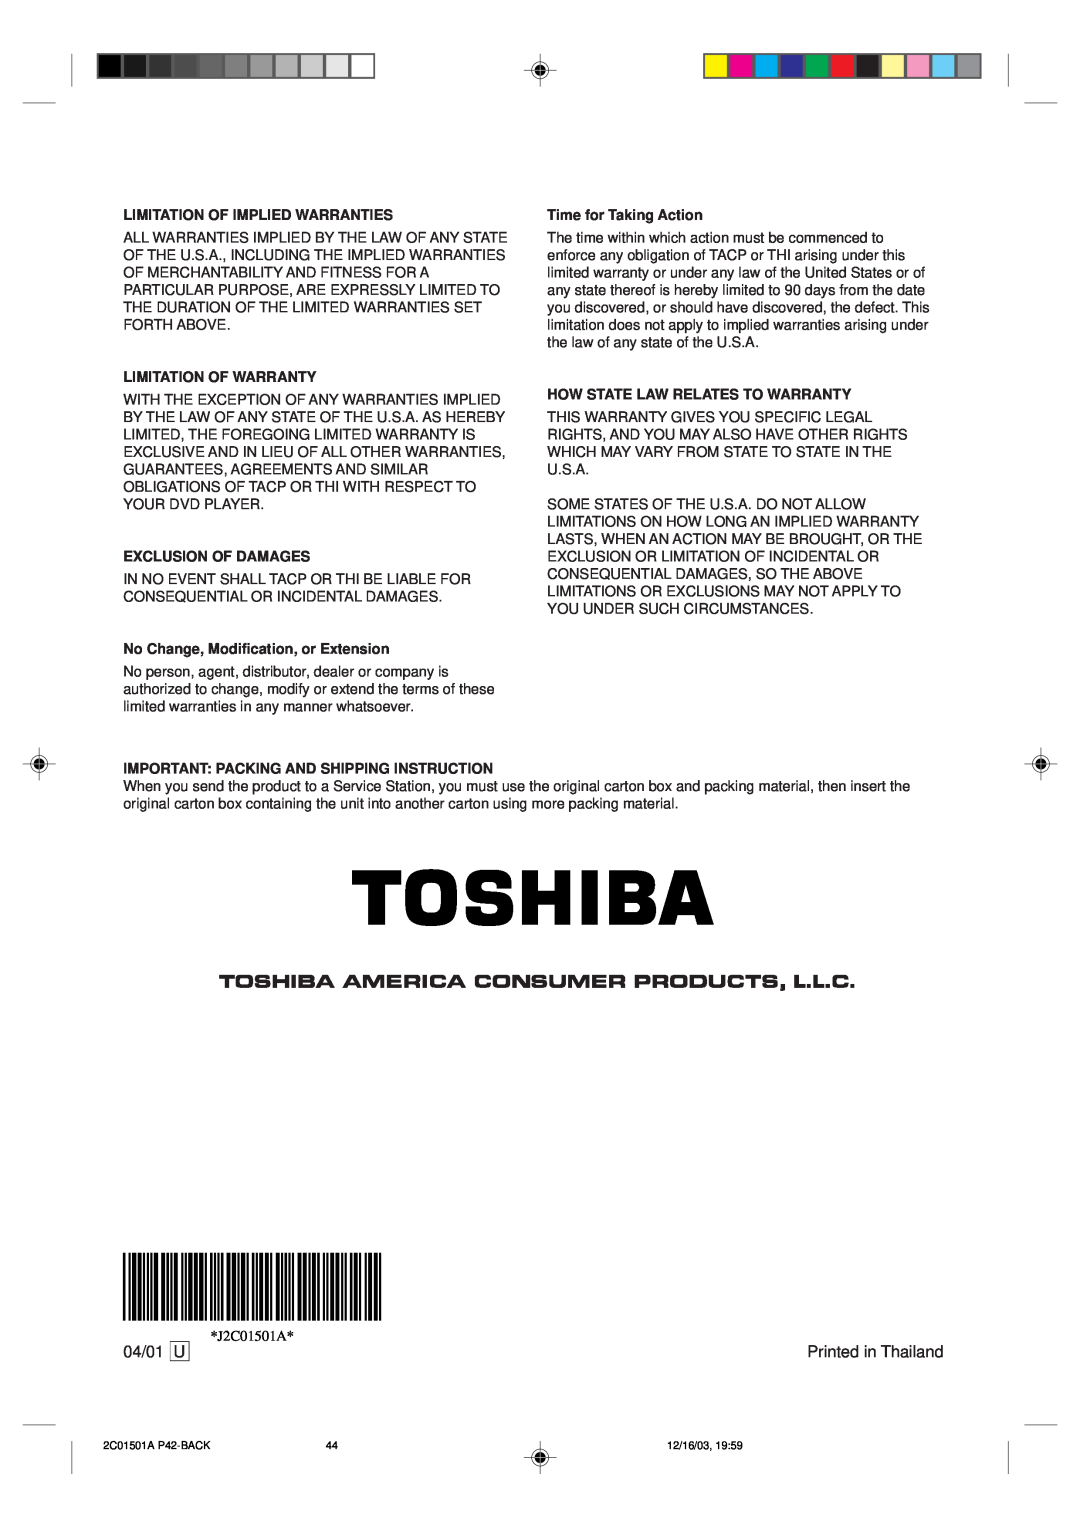 Toshiba SD-K740SU Limitation Of Implied Warranties, Limitation Of Warranty, Exclusion Of Damages, Time for Taking Action 